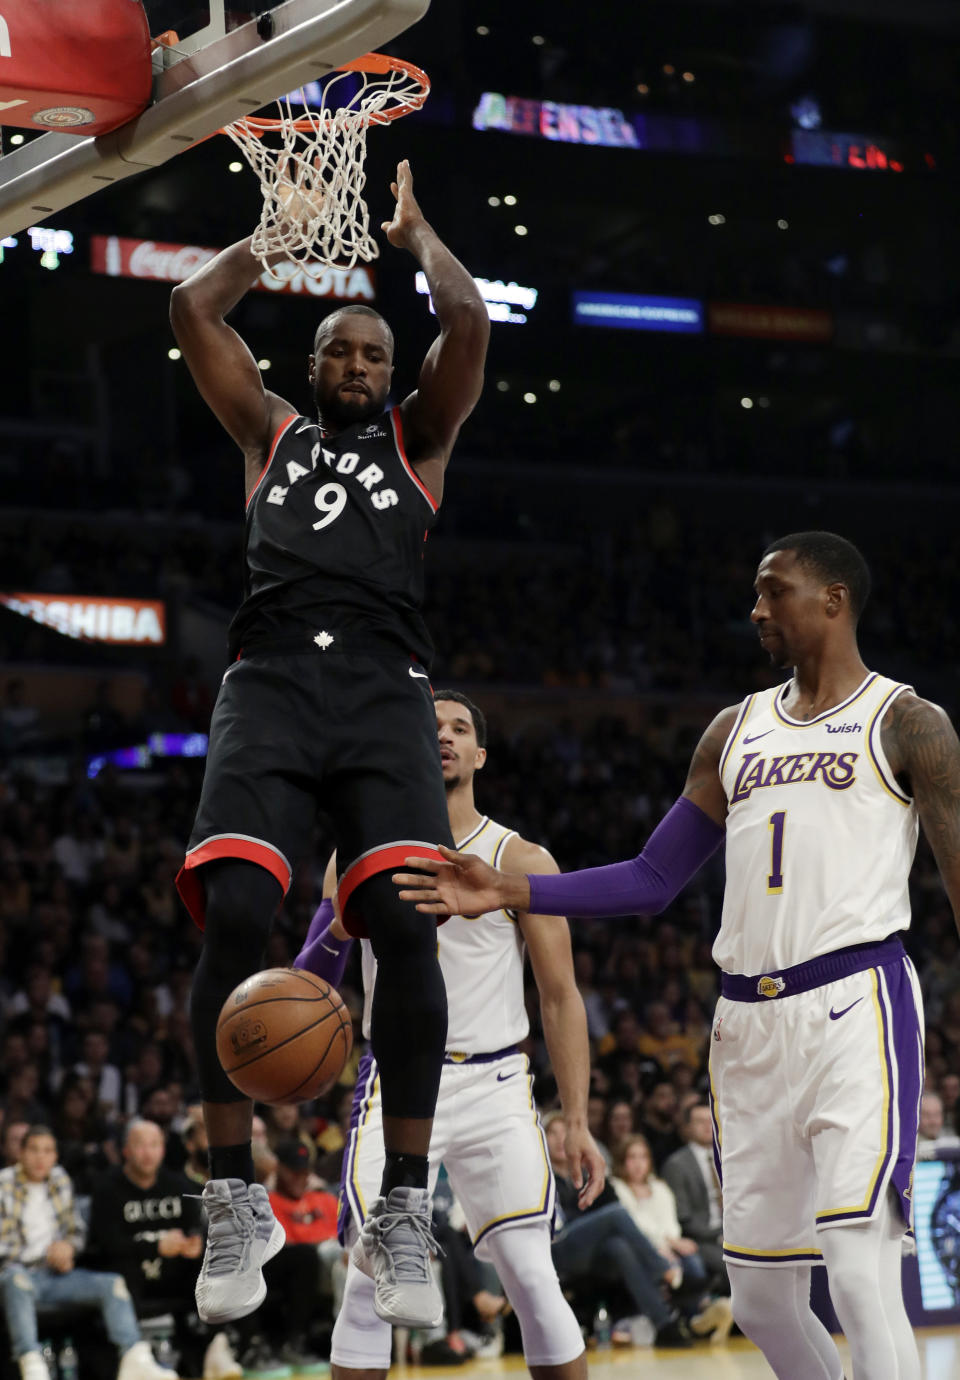 Toronto Raptors' Serge Ibaka (9) dunks against the Los Angeles Lakers during the second half of an NBA basketball game Sunday, Nov. 4, 2018, in Los Angeles. (AP Photo/Marcio Jose Sanchez)